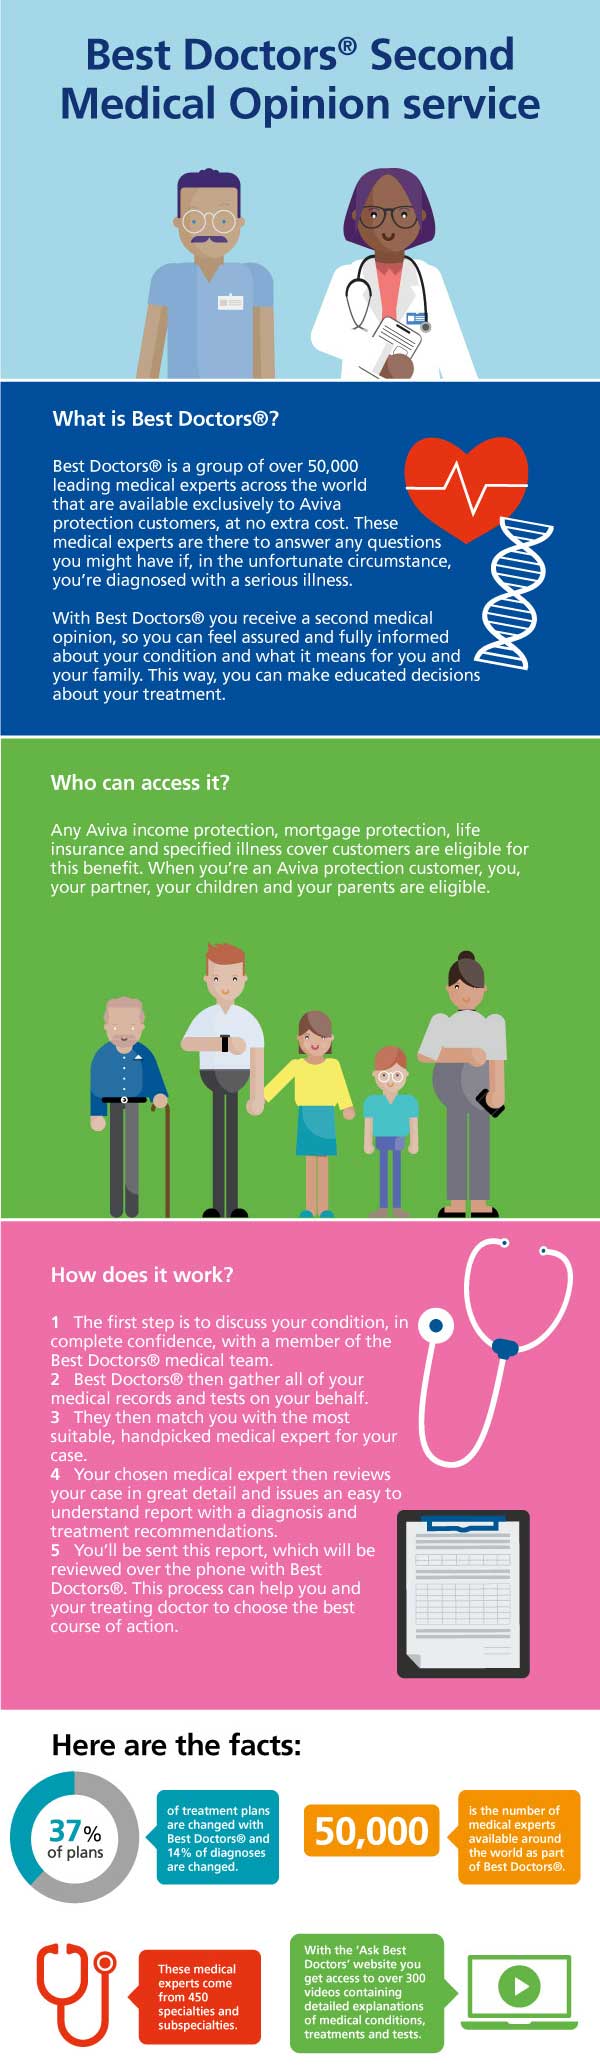 Infographic about Best Doctors® second medical opinion service includes what is best doctors, who can access it, how it works and more